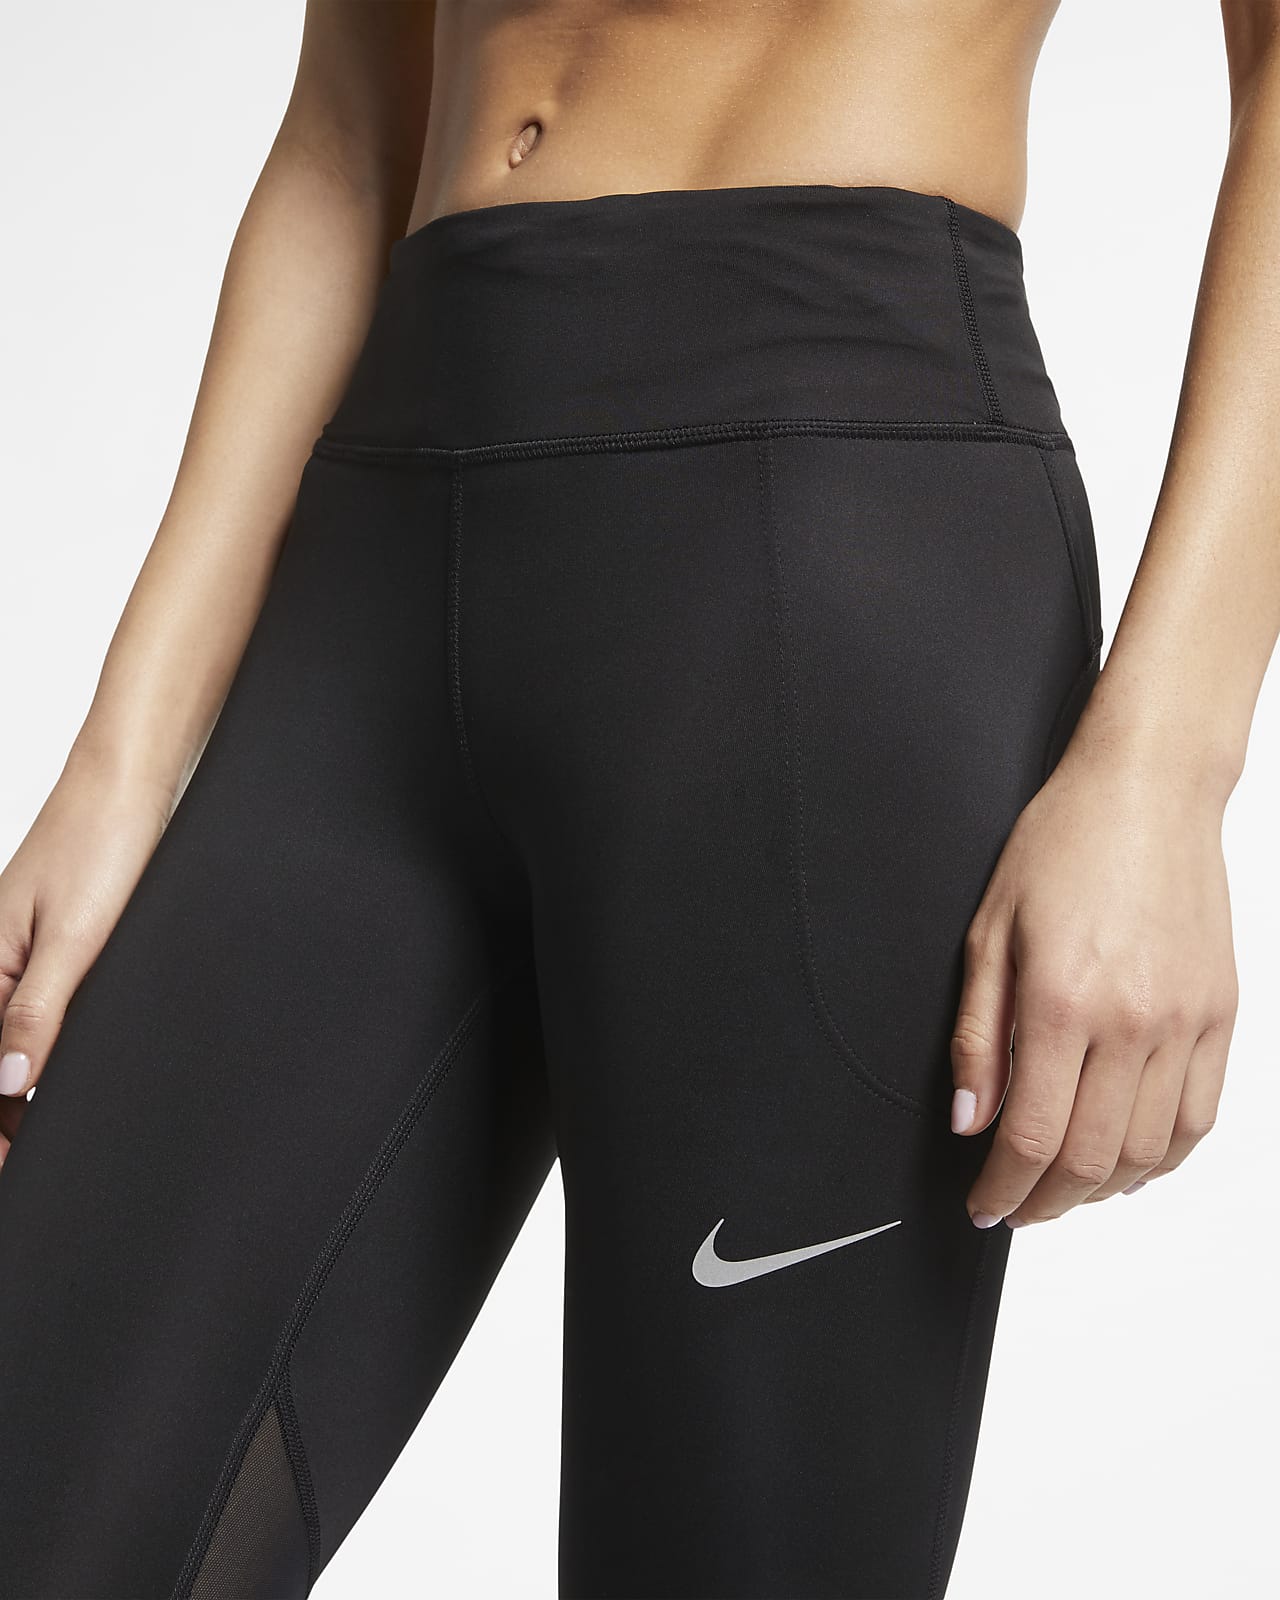 nike women's running tights with pocket